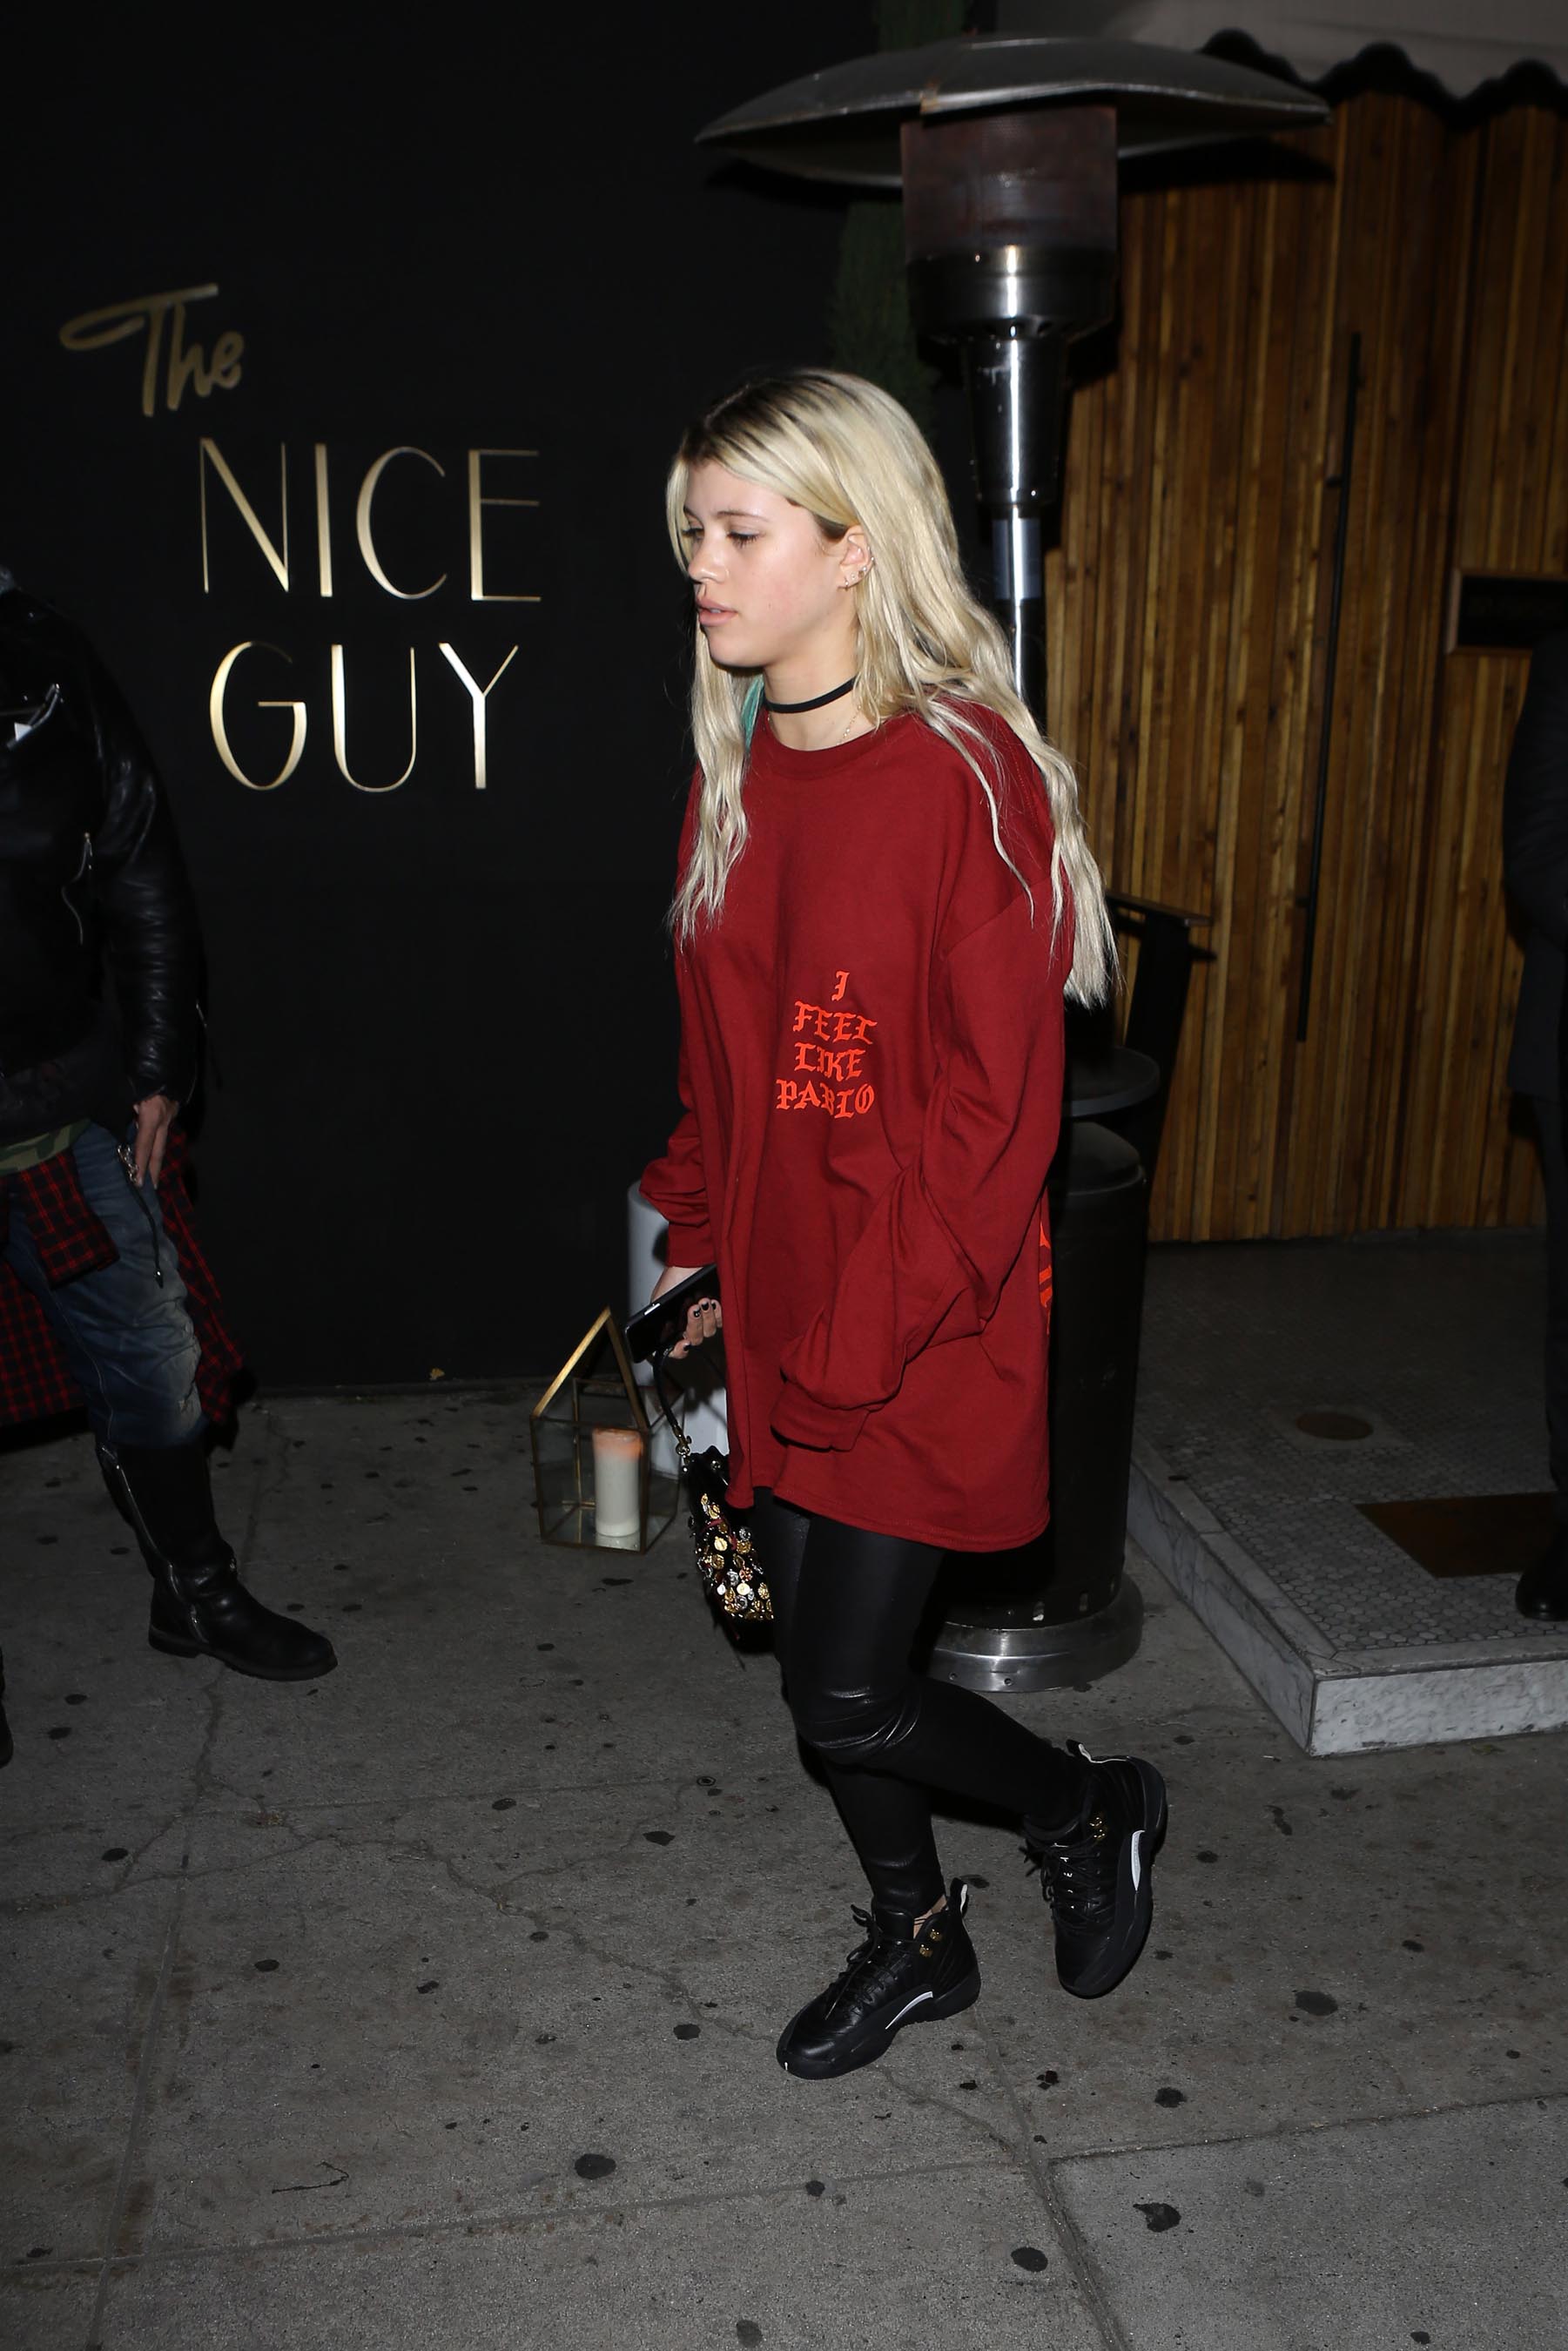 Sofia Richie at The Nice Guy